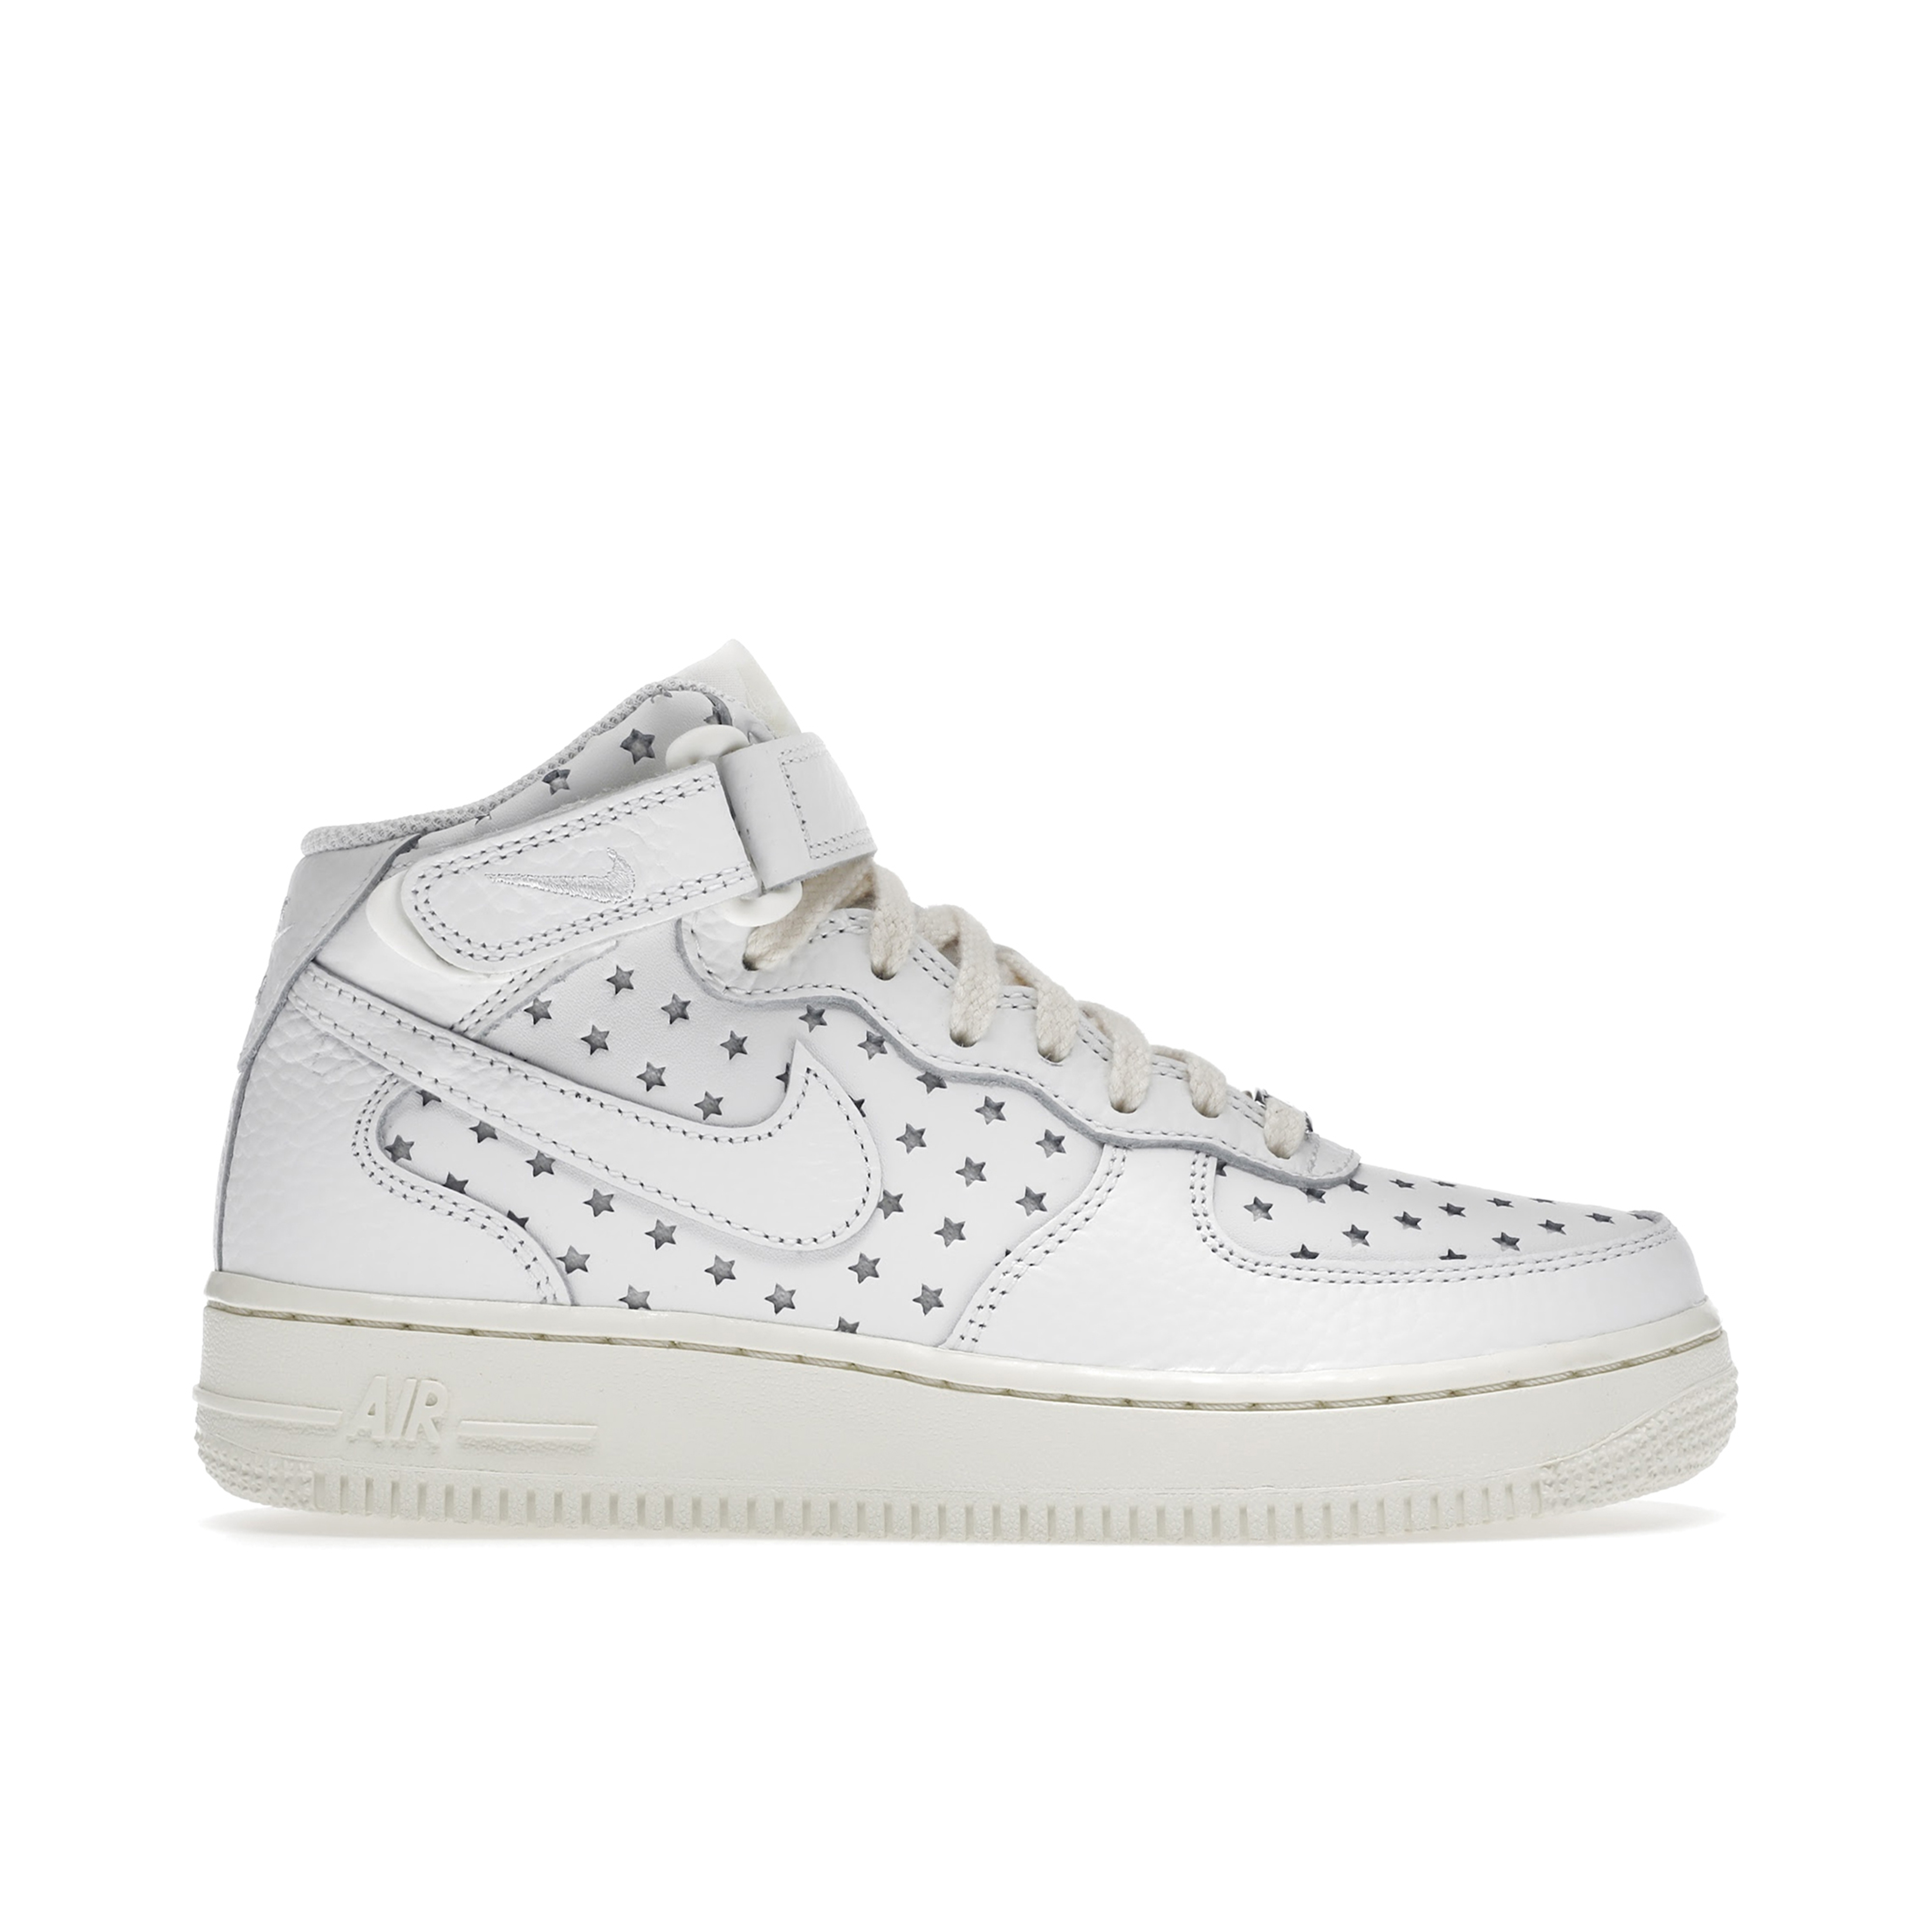 Nike Air Force 1 High Summit White Light Bone 2022 for Sale, Authenticity  Guaranteed